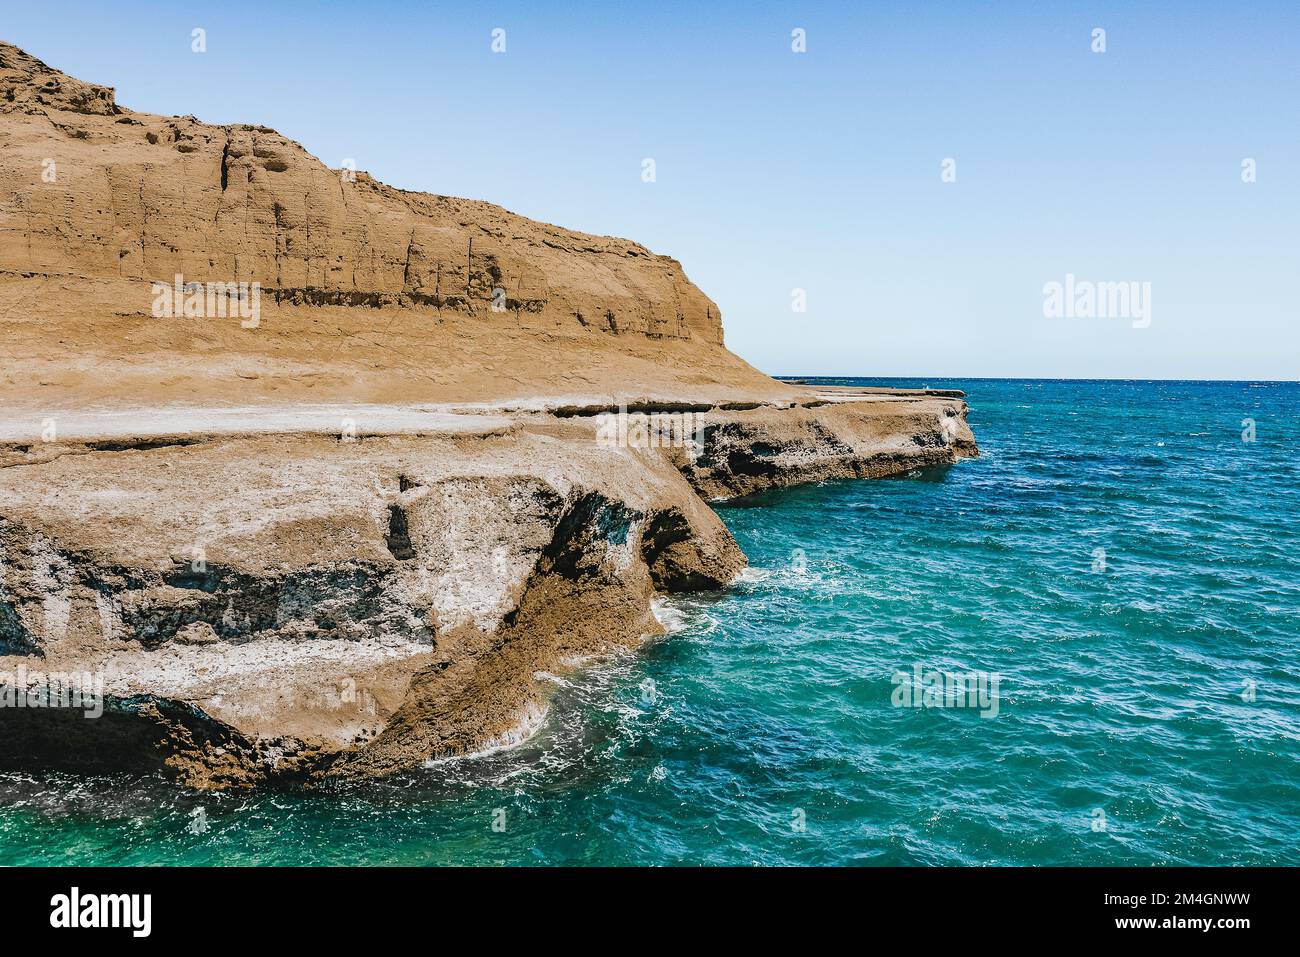 Beautiful landscape of rocky cliff and blue sea in the atlantic coast of Peninsula Valdes, a nature reserve in the Patagonian coast of Argentina. Stock Photo